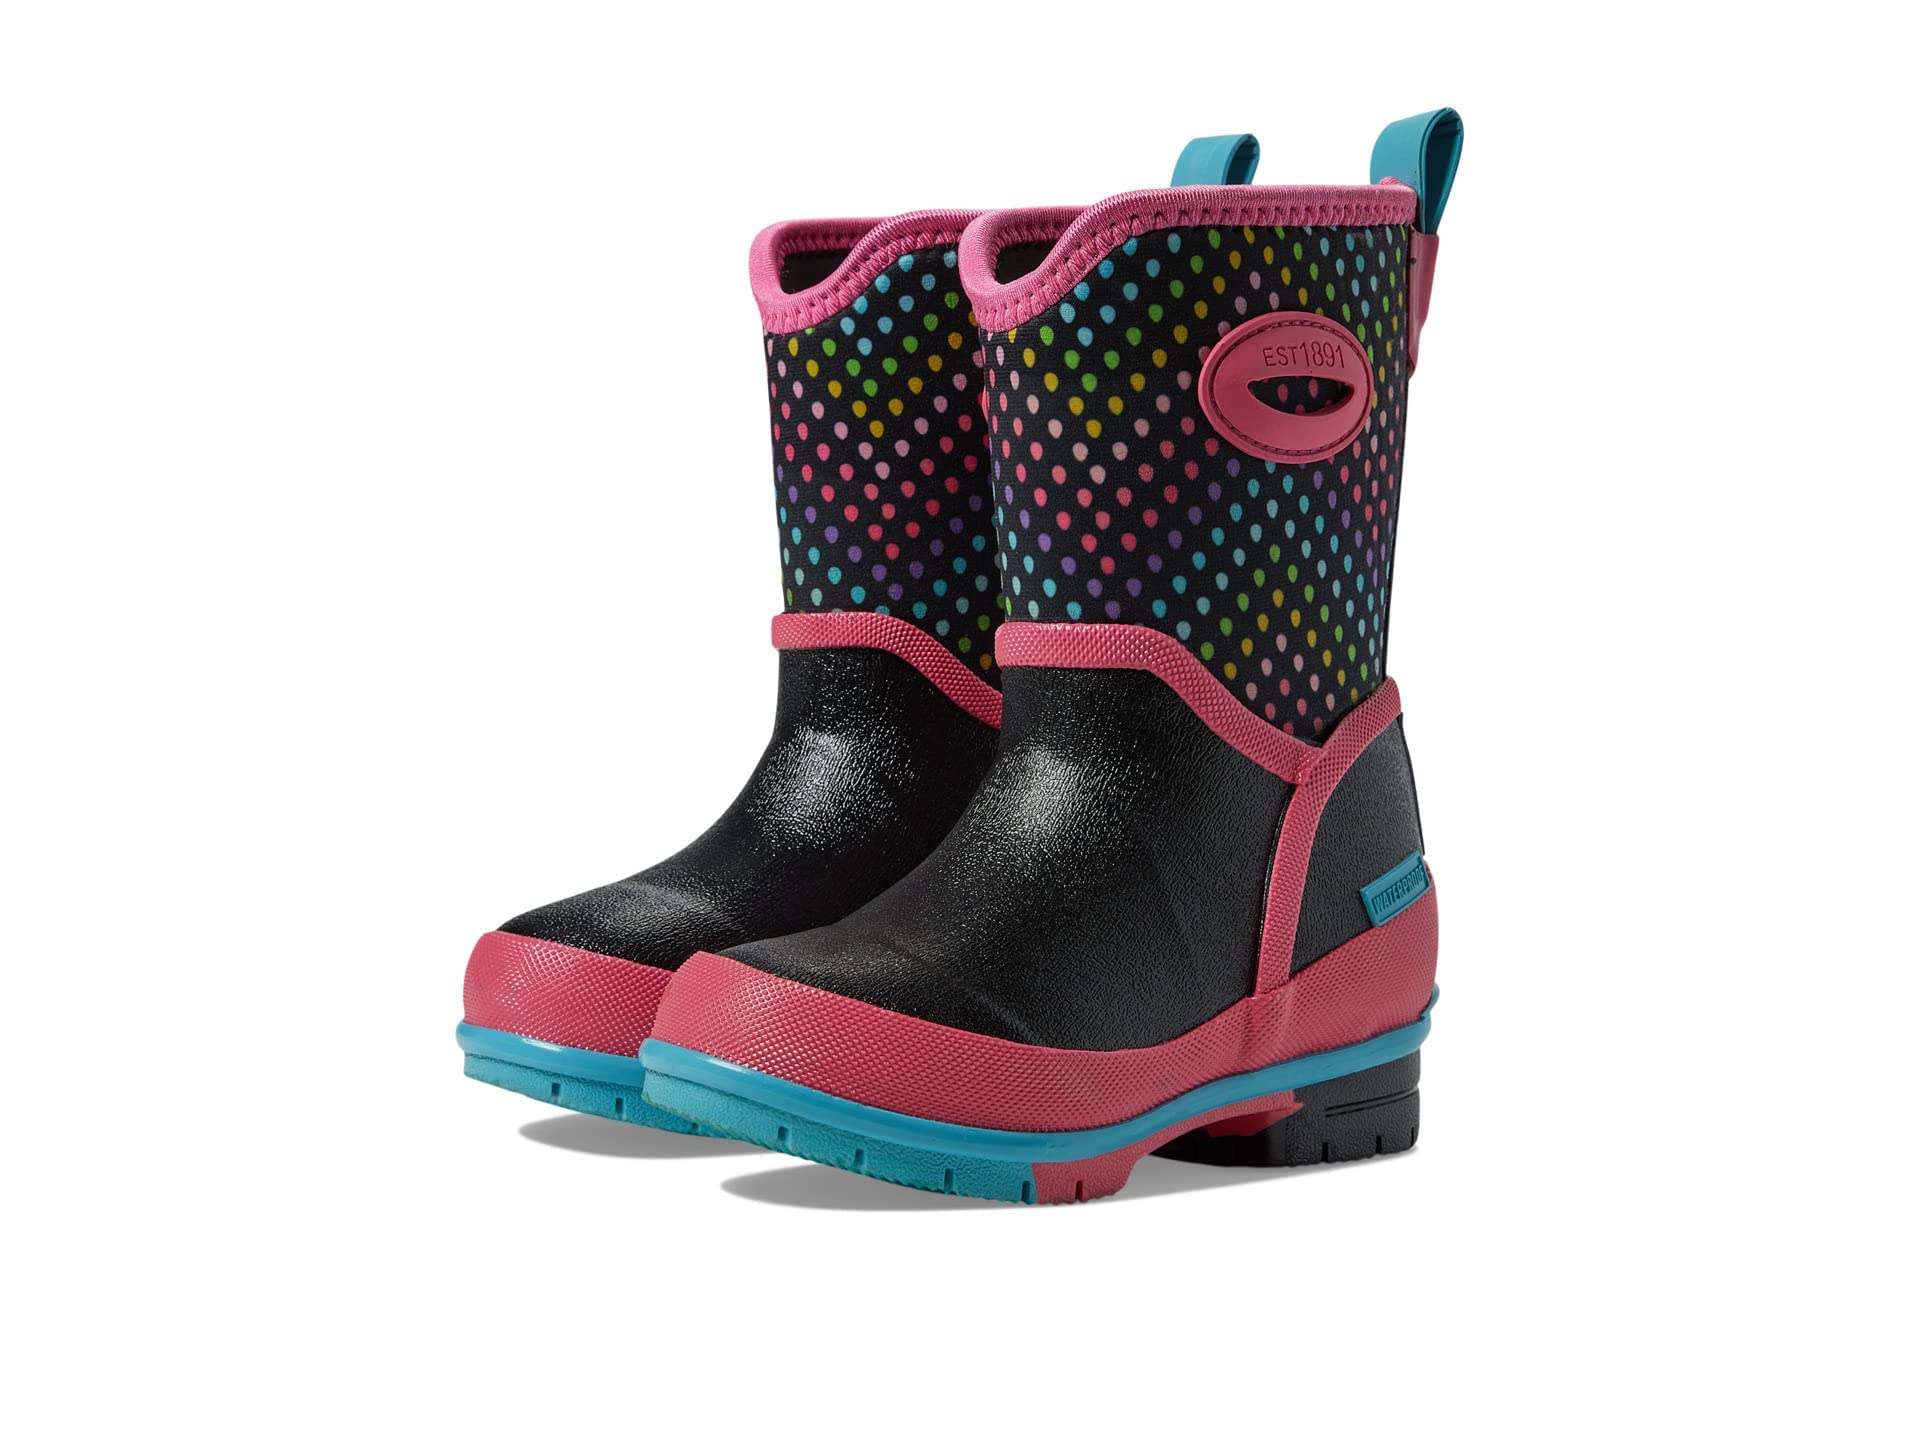 Western Chief Girl's Cold Rated Neoprene Boots (Toddler/Little Kid/Big Kid) Rainbow Wave 13 Little Kid M